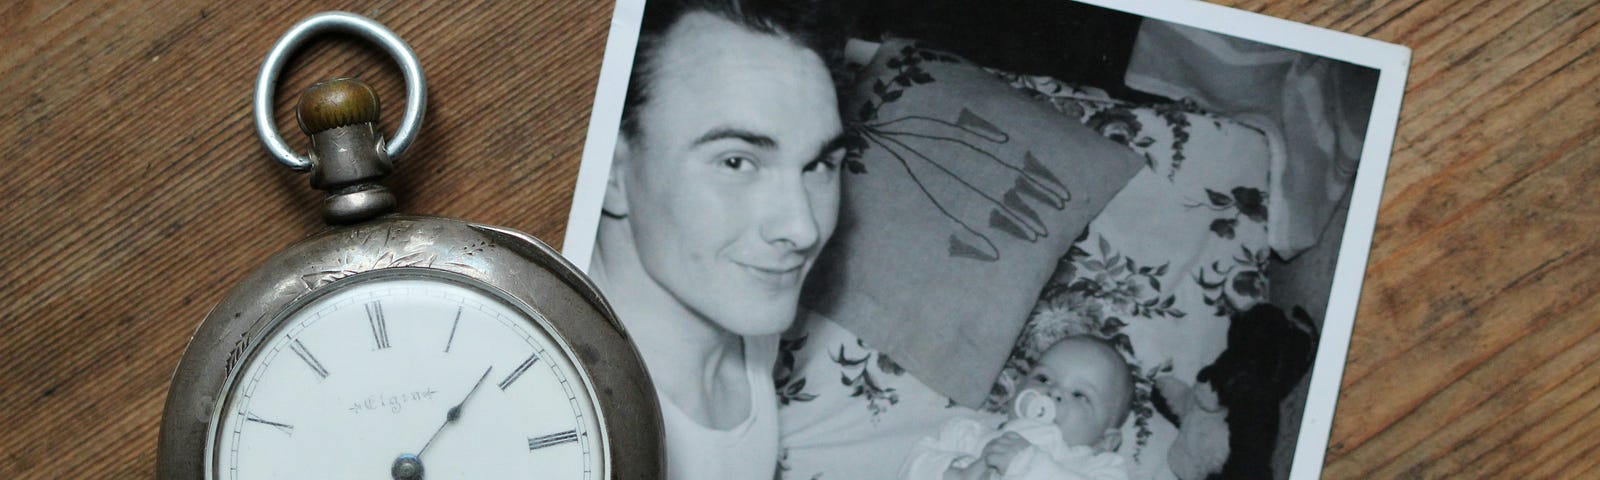 Old black and white photo of father and baby. Stop watch beside the photo.